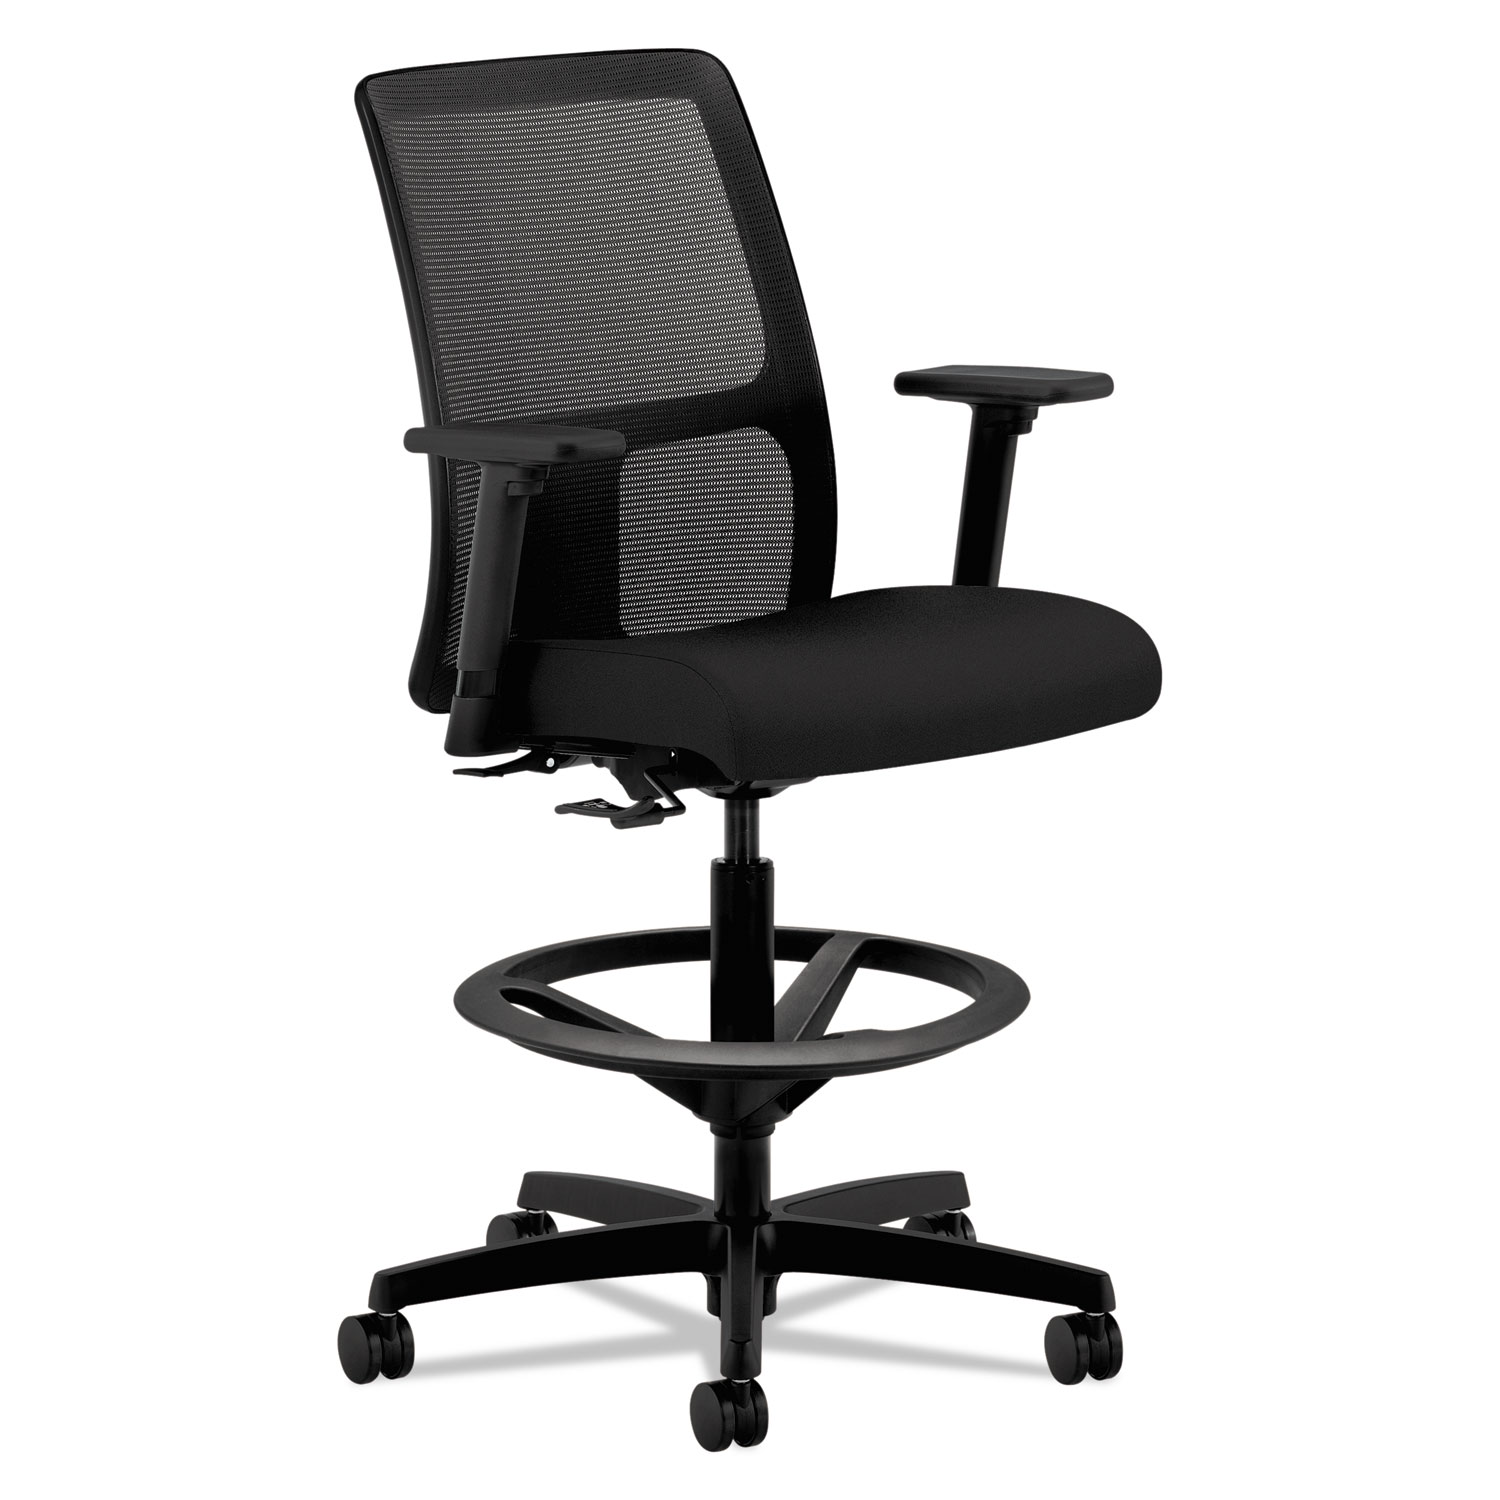  HON HITS5.A.H.M.CU10.T.SB Ignition Series Mesh Low-Back Task Stool, 33 Seat Height, Supports up to 300 lbs., Black Seat/Black Back, Black Base (HONIT108CU10) 